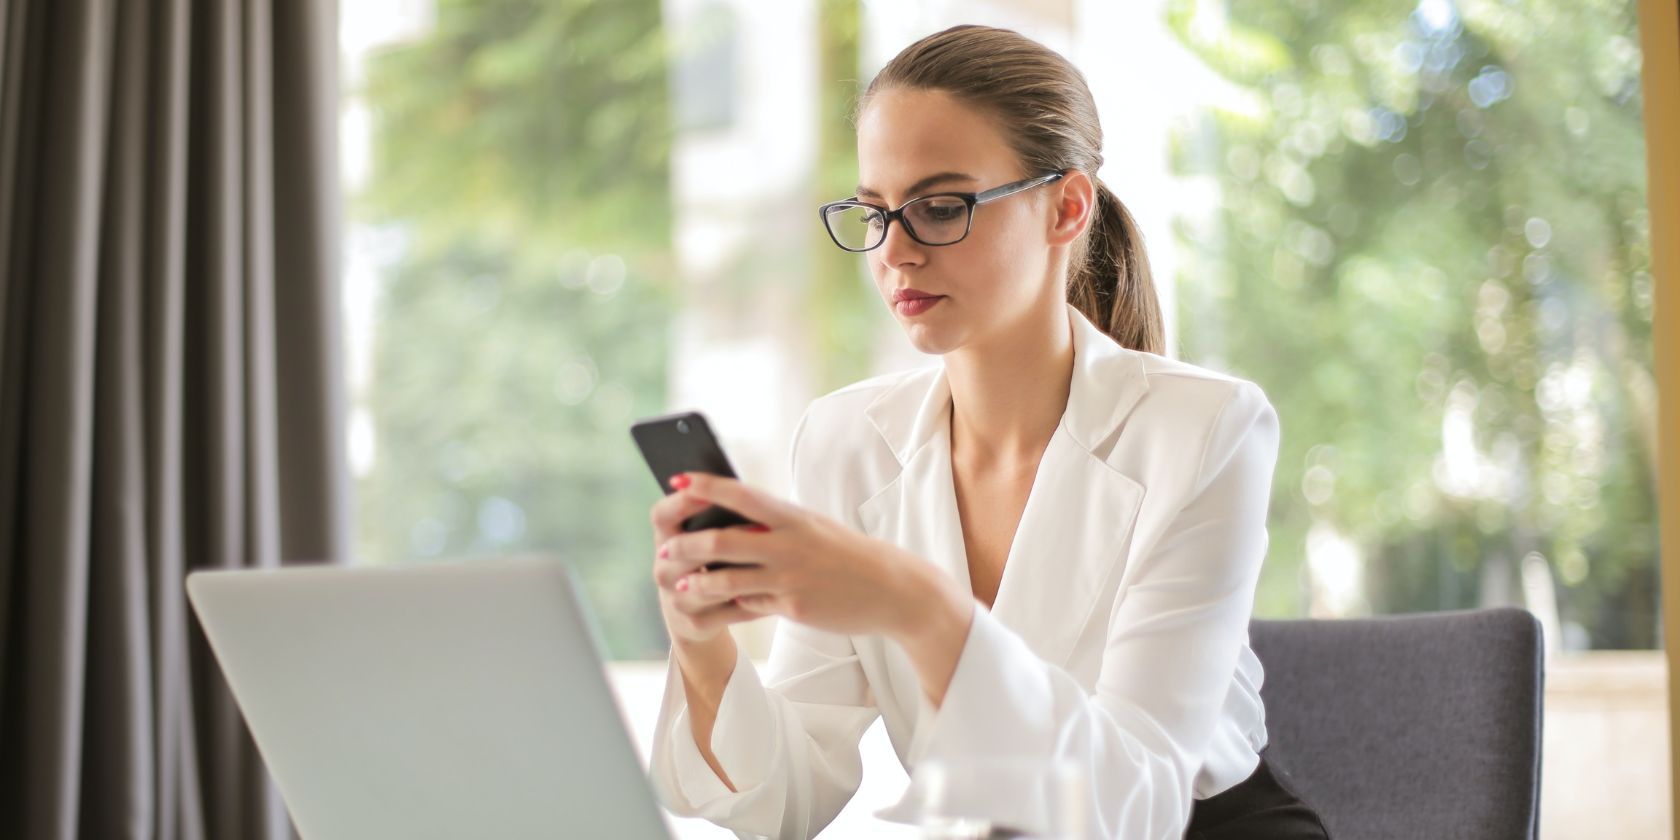 Serious looking woman in white blouse using a smartphone in the workplace